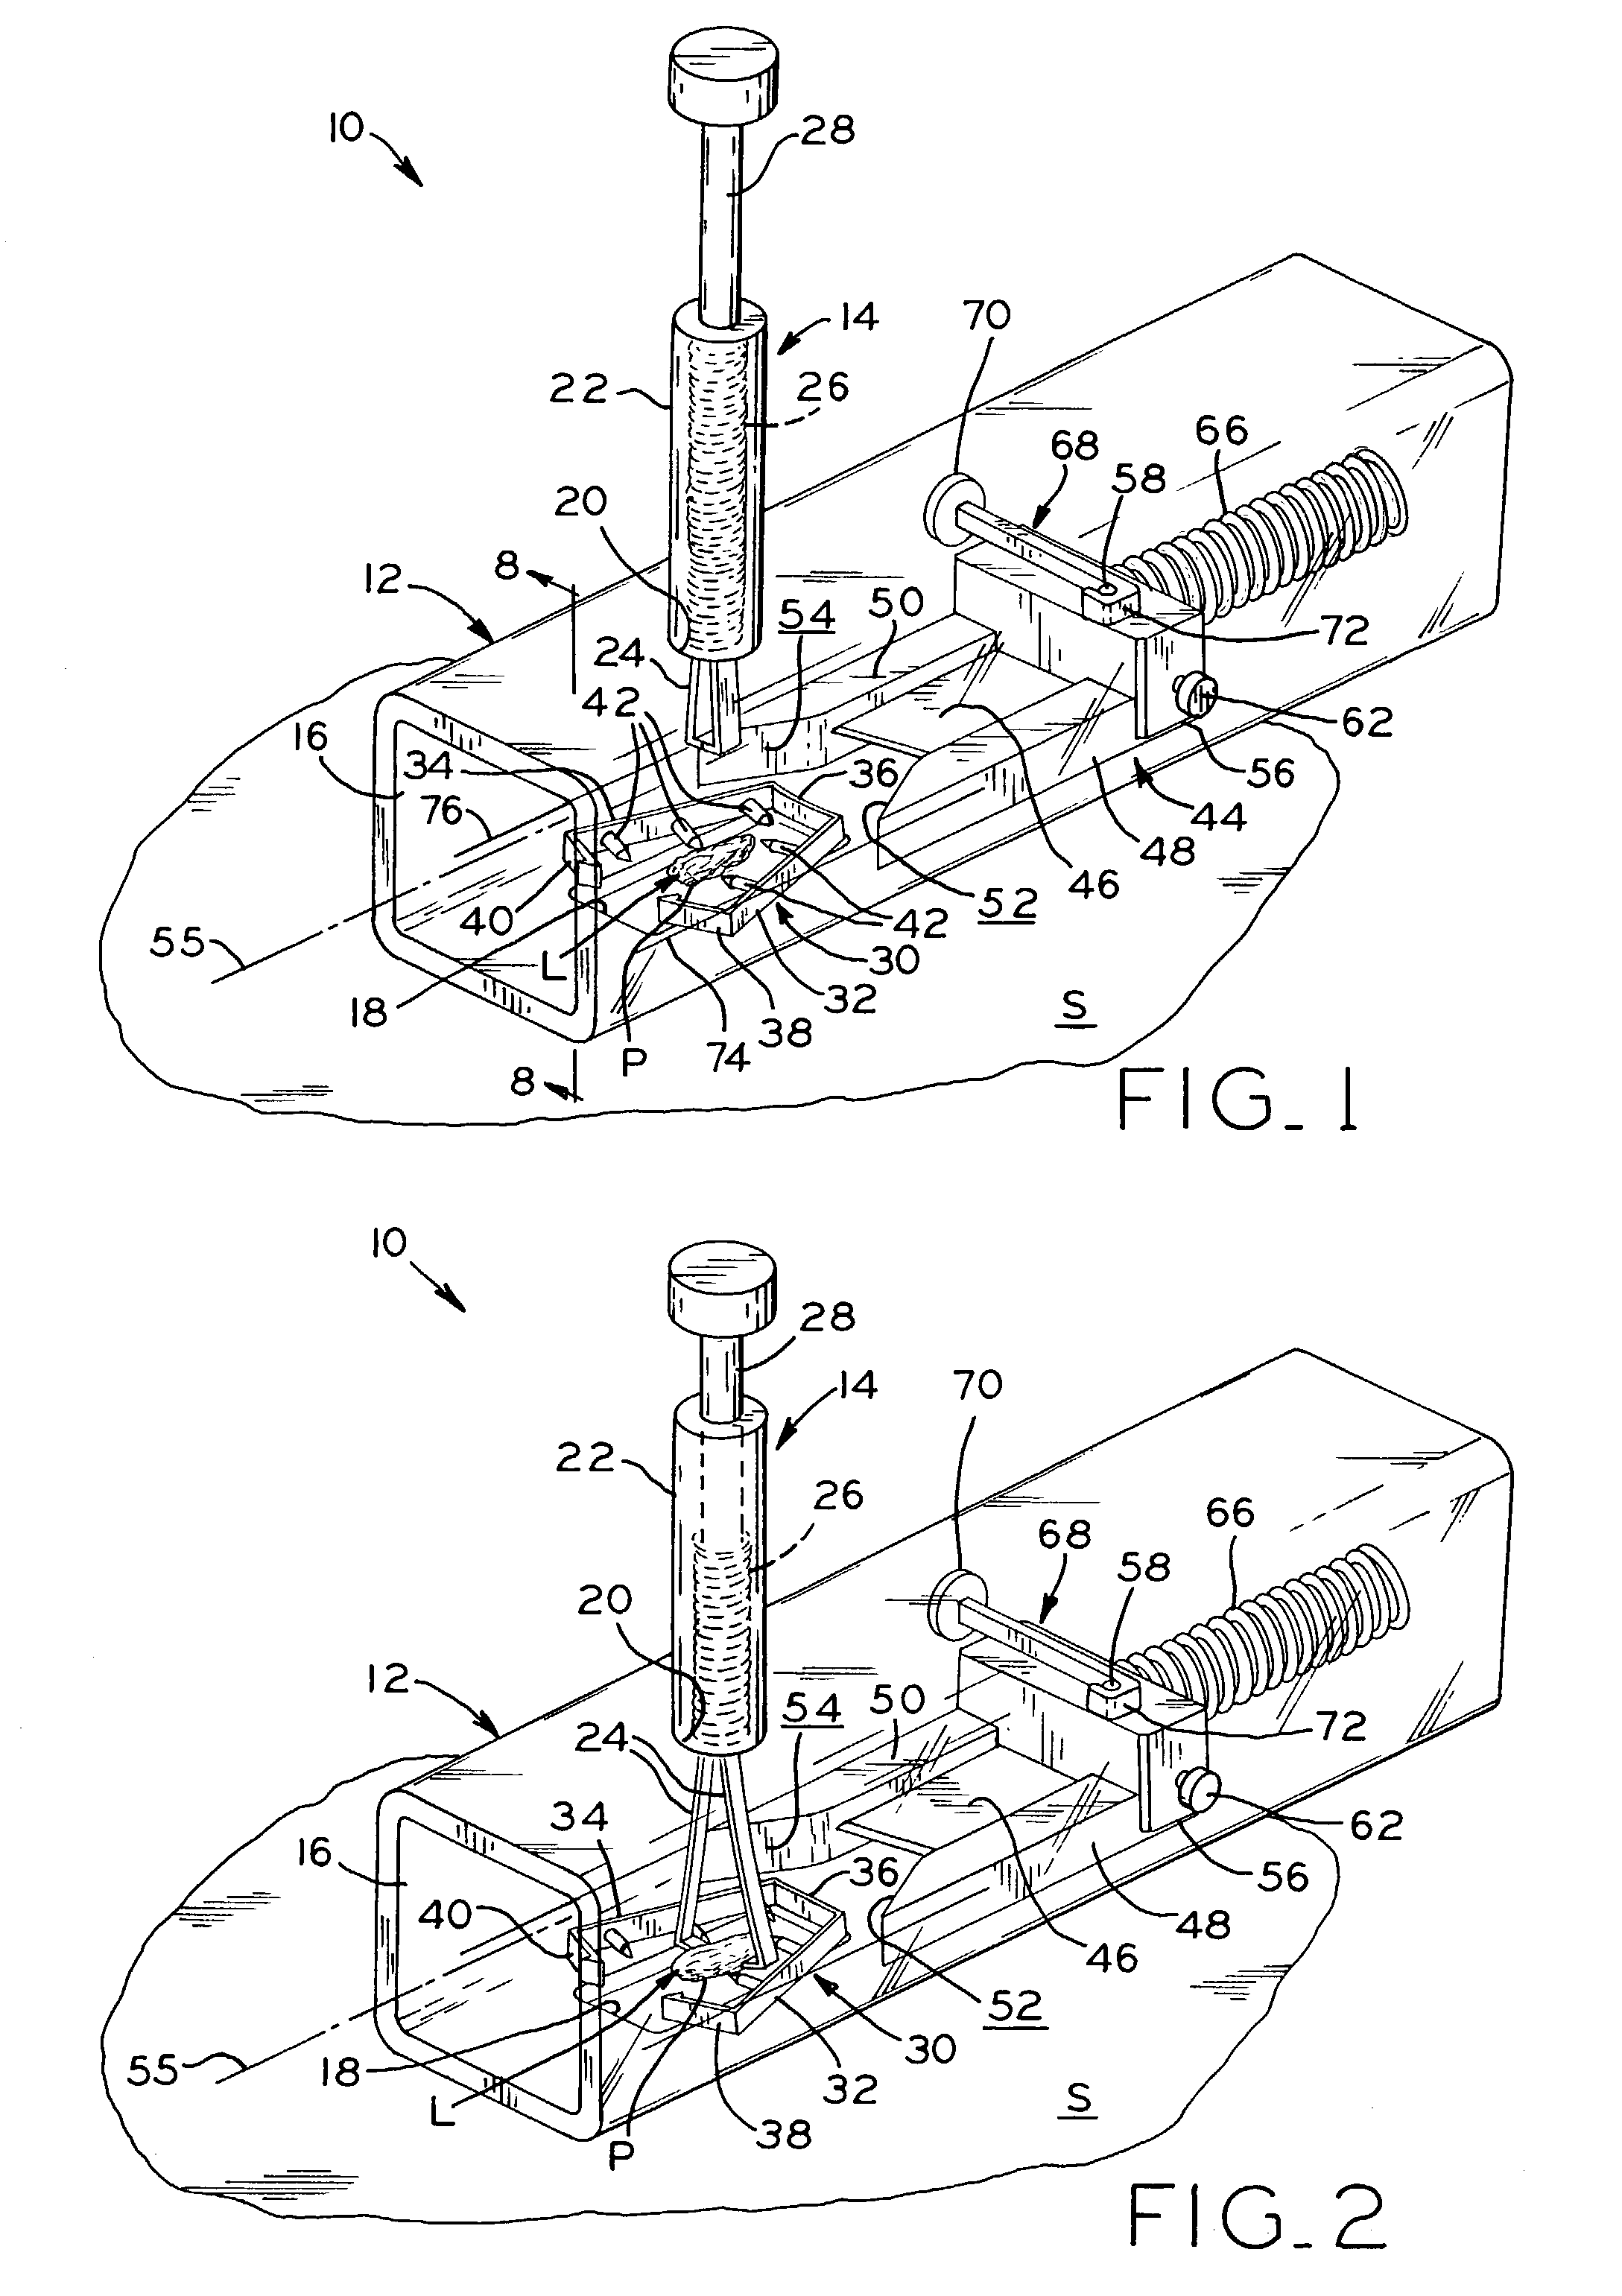 Skin lesion exciser and skin-closure device therefor